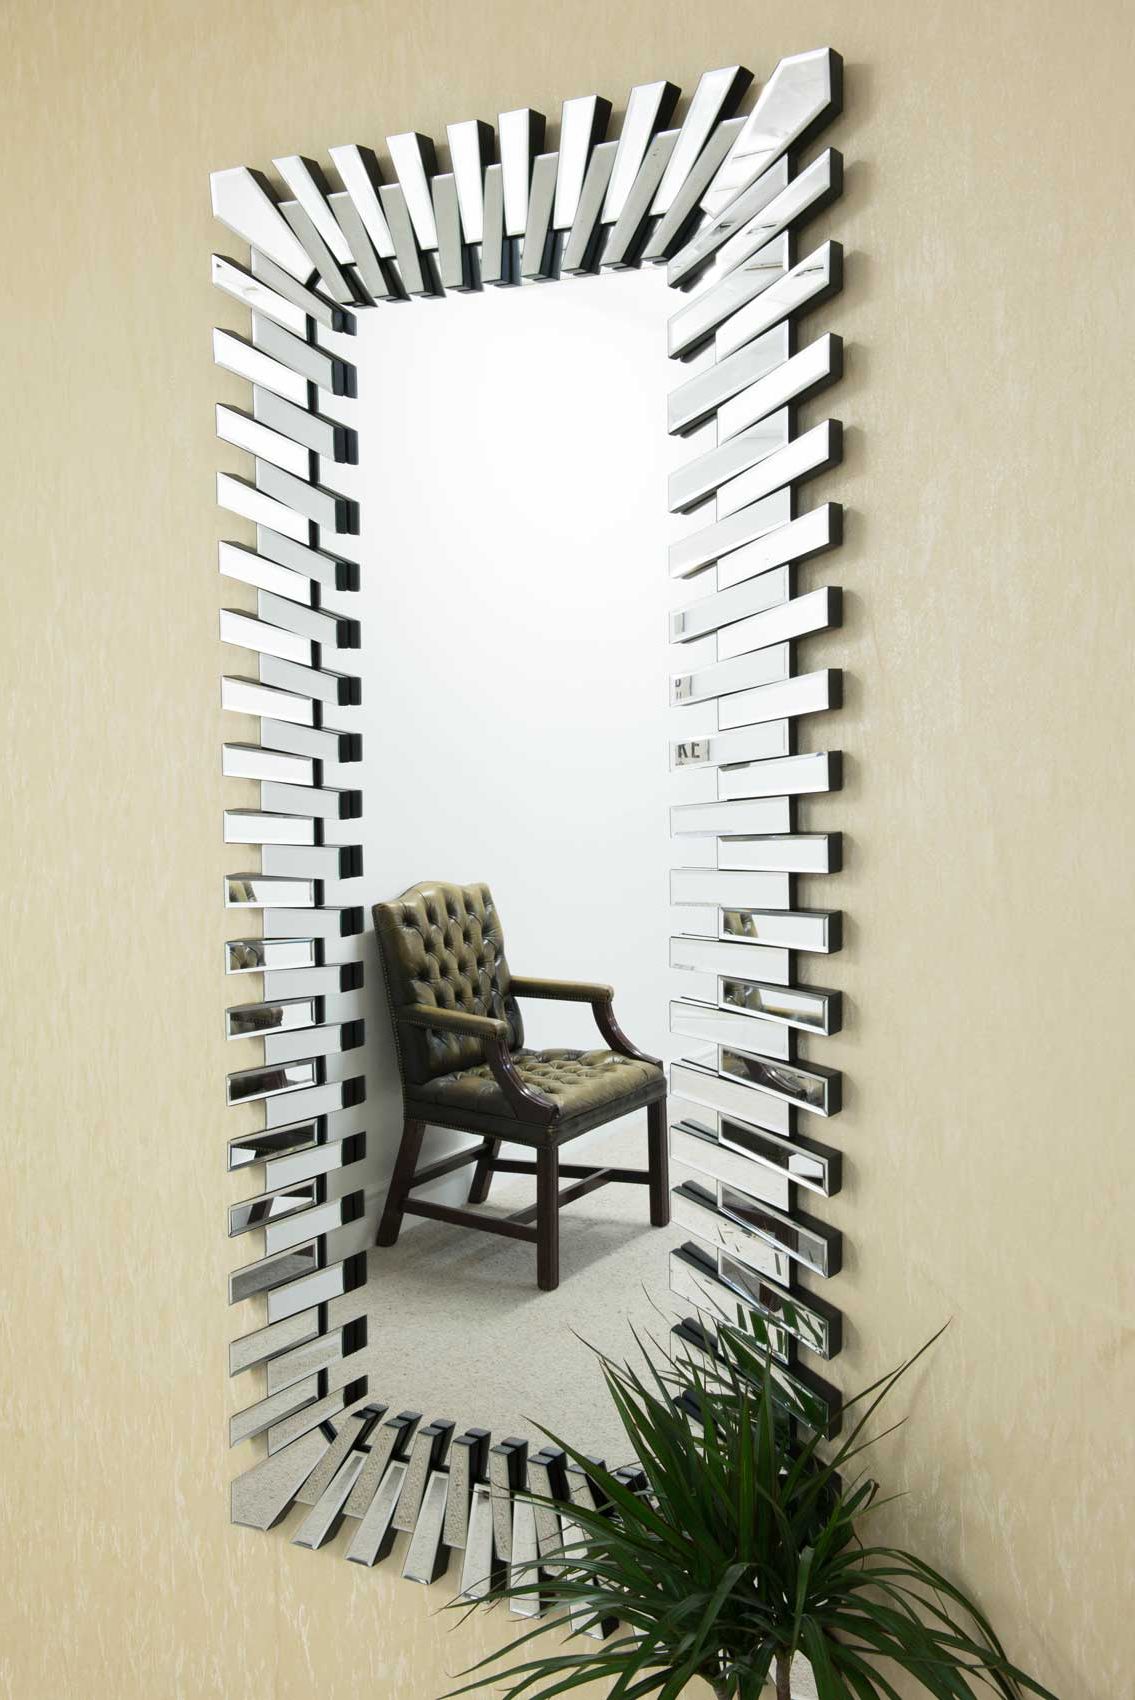 Details About Large Wall Mirror Modern Unique 3d Sunburst All Glass  Venetian Rectangular With Regard To Most Popular Large Modern Wall Mirrors (View 2 of 20)